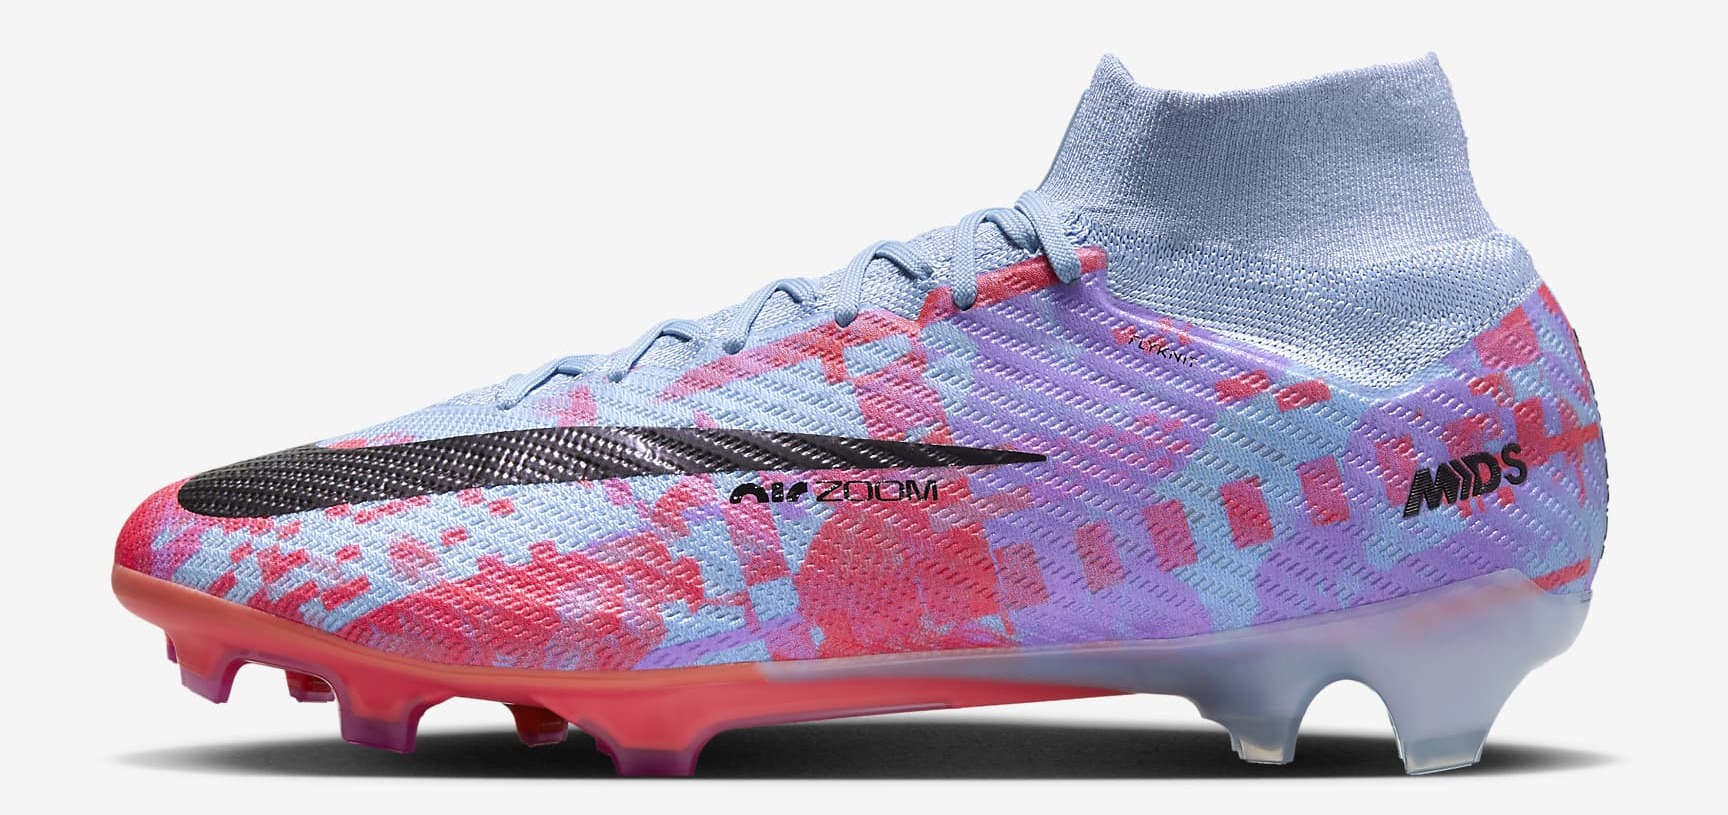 Cristiano Ronaldo's new Nike Zoom Mercurial World Cup boots, leaked